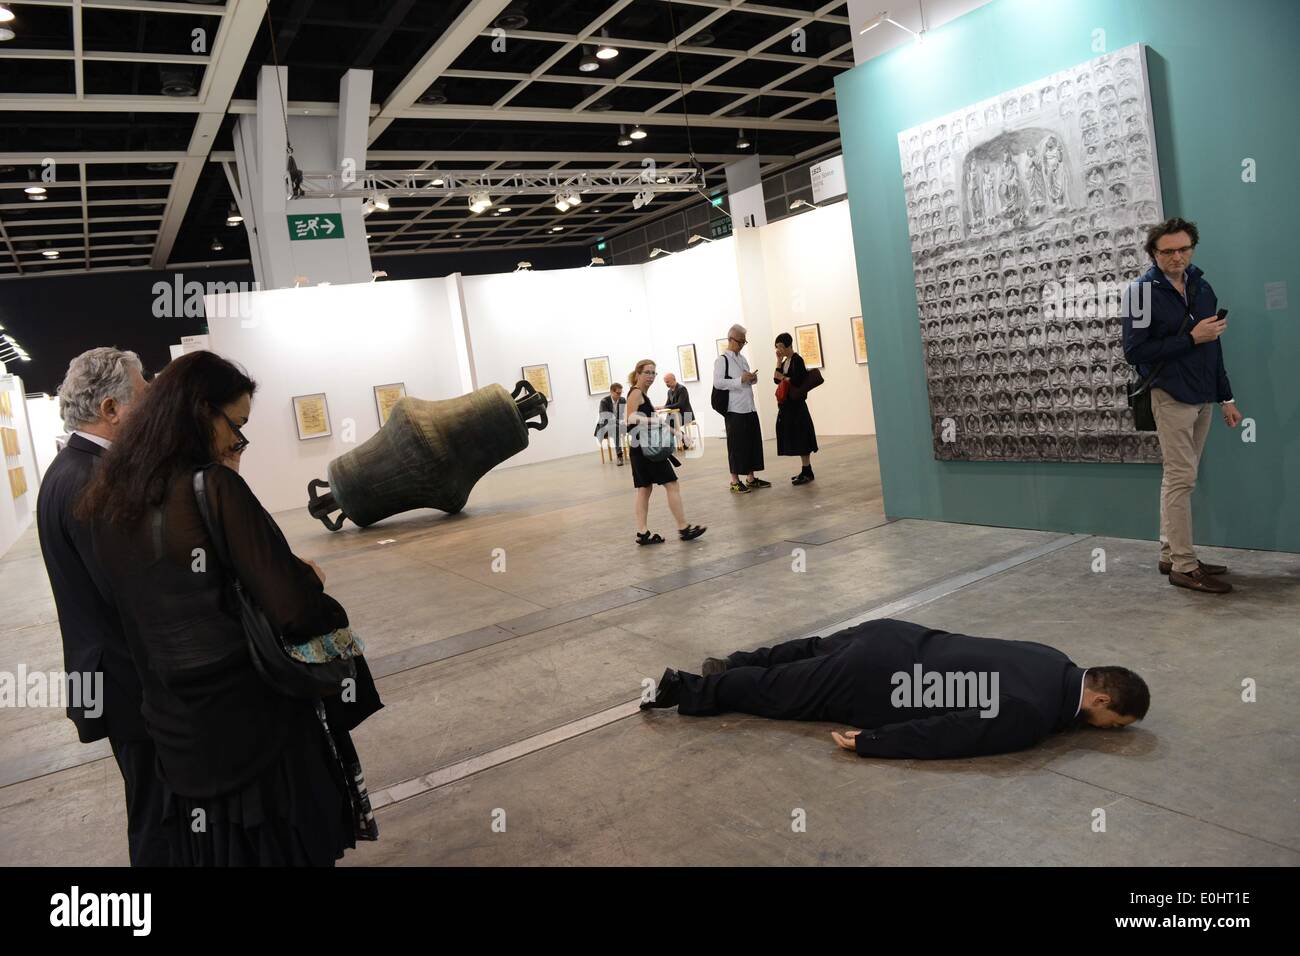 Hong Kong, China. 14th May, 2014. People visit the preview of the Art Basel show in Hong Kong, south China, May 14, 2014. The Art Basel stages the world's premier modern and contempoary art shows held annually in Basel, Miami Beach and Hong Kong. © Lui Siu Wai/Xinhua/Alamy Live News Stock Photo